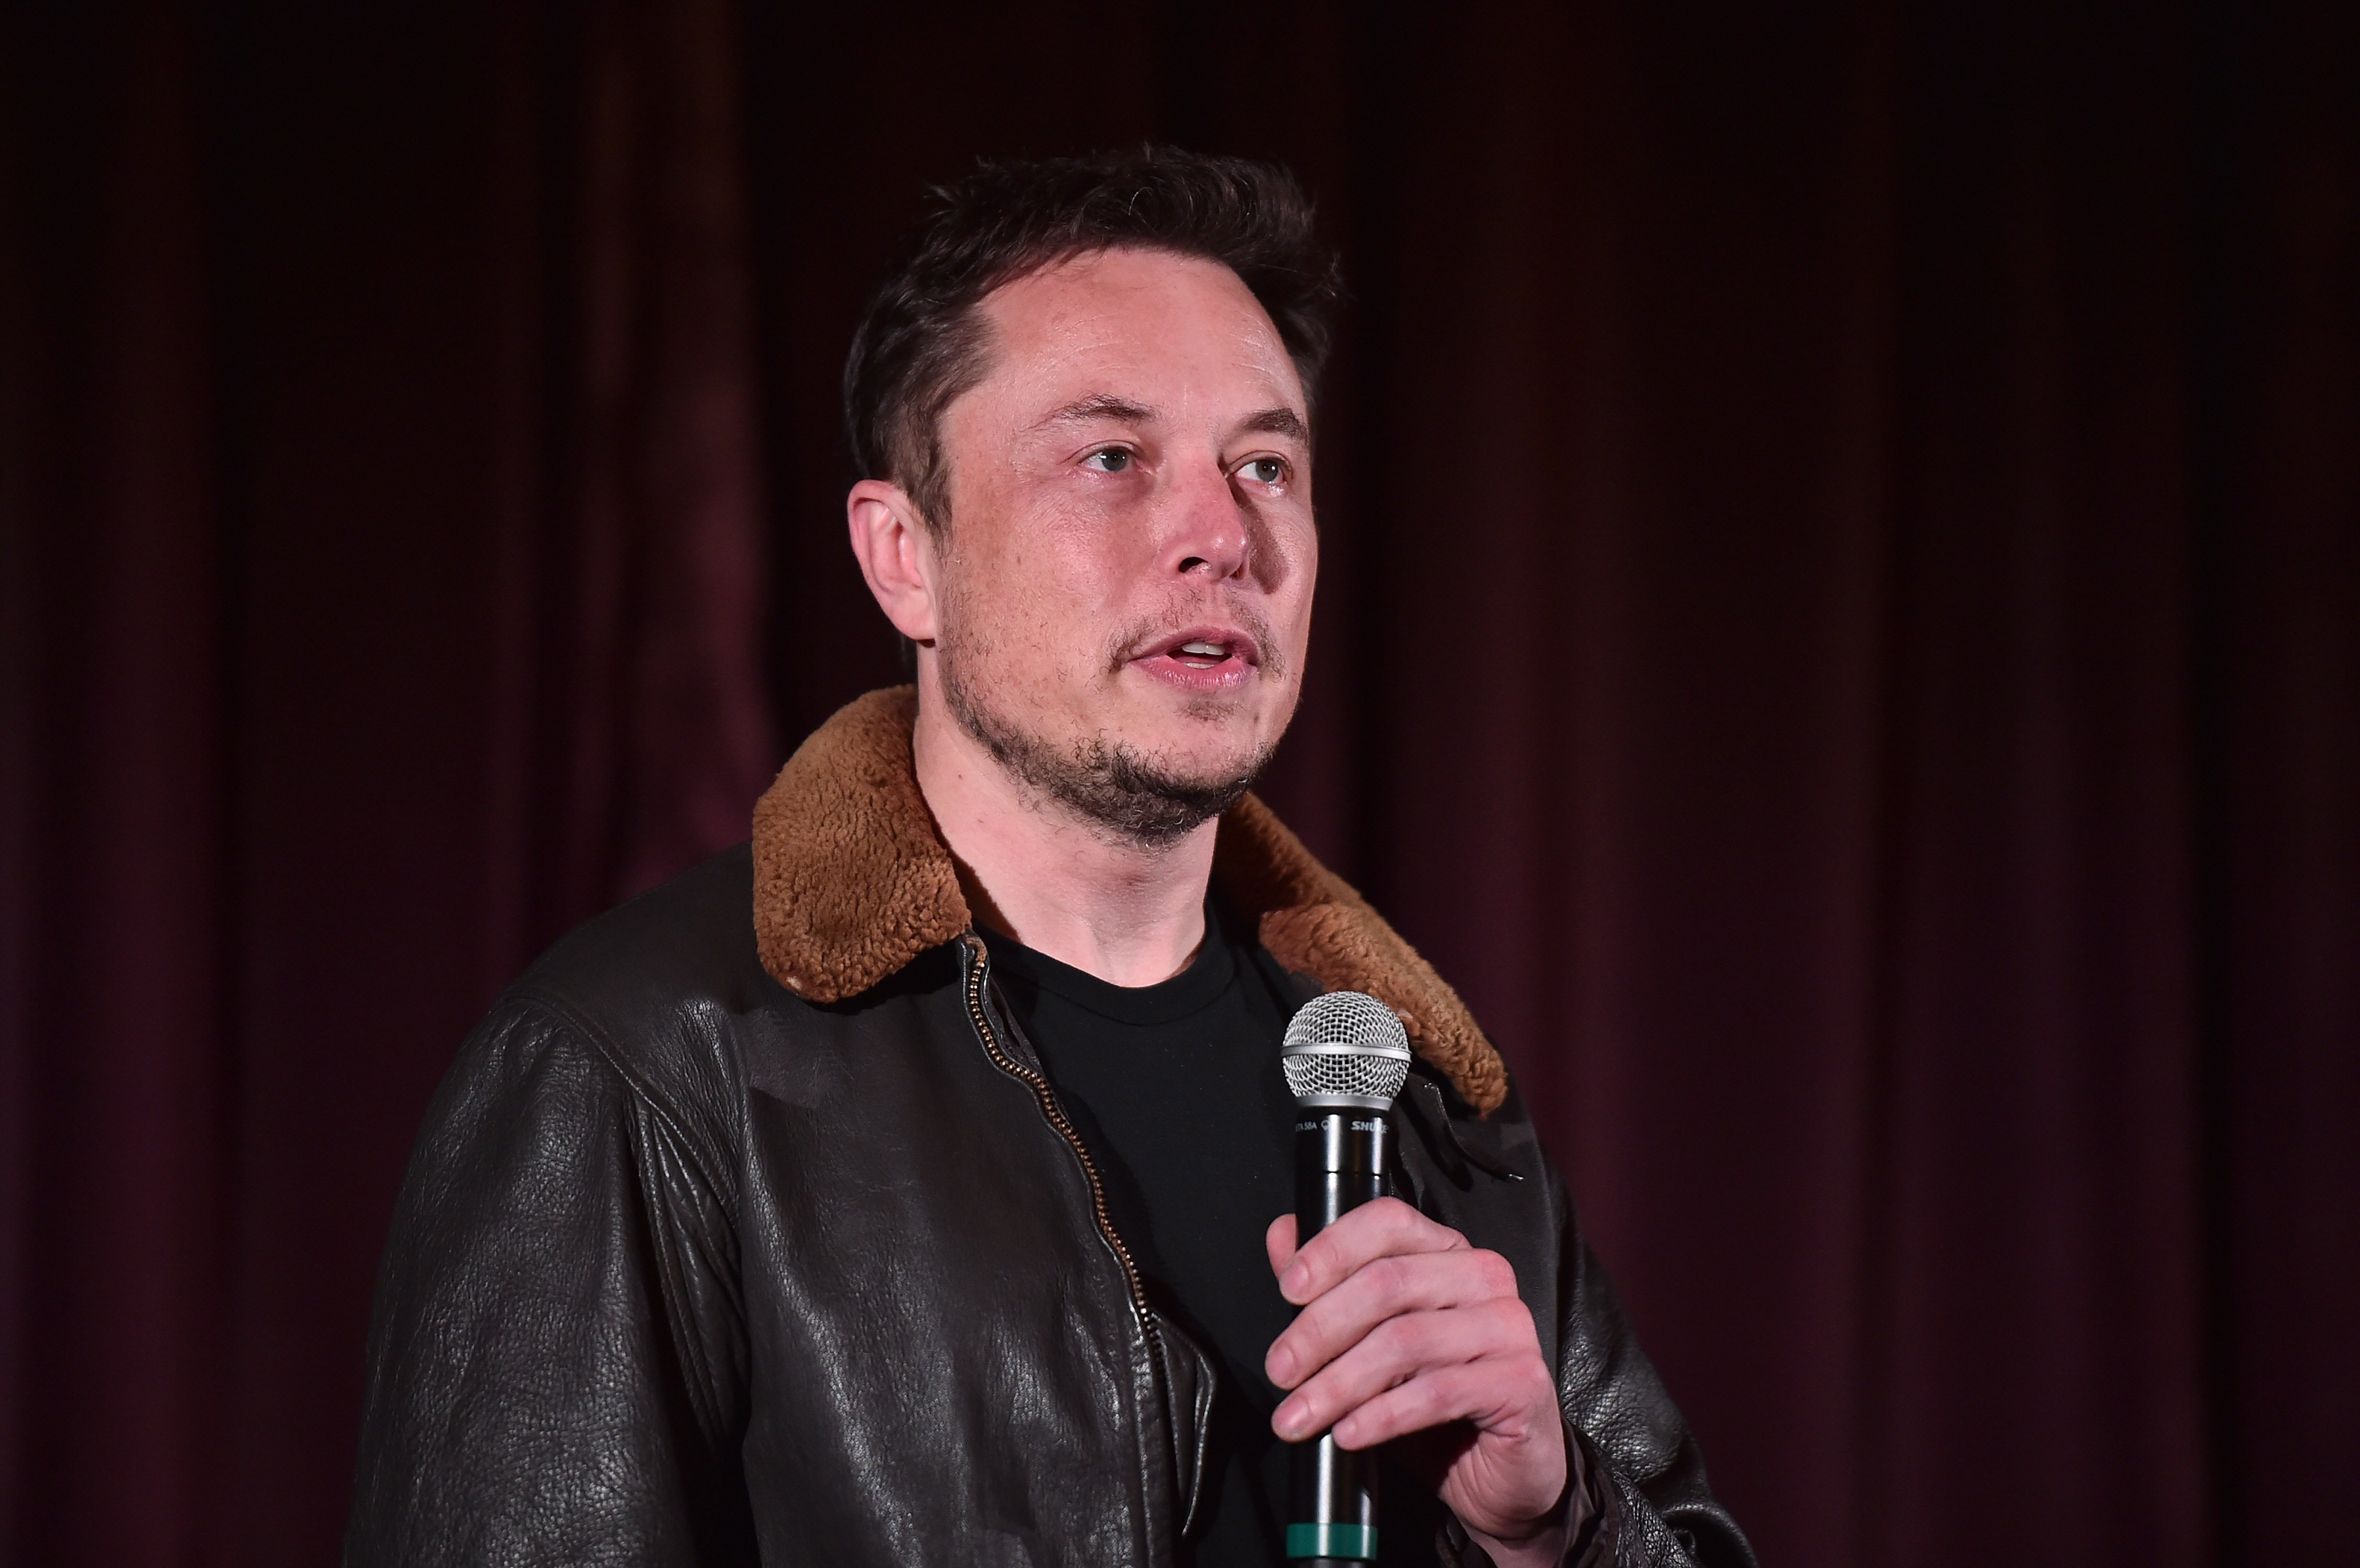  Elon Musk at the Q&A for "Do You Trust This Computer?" on April 5, 2018 in California. | Source: Getty Images